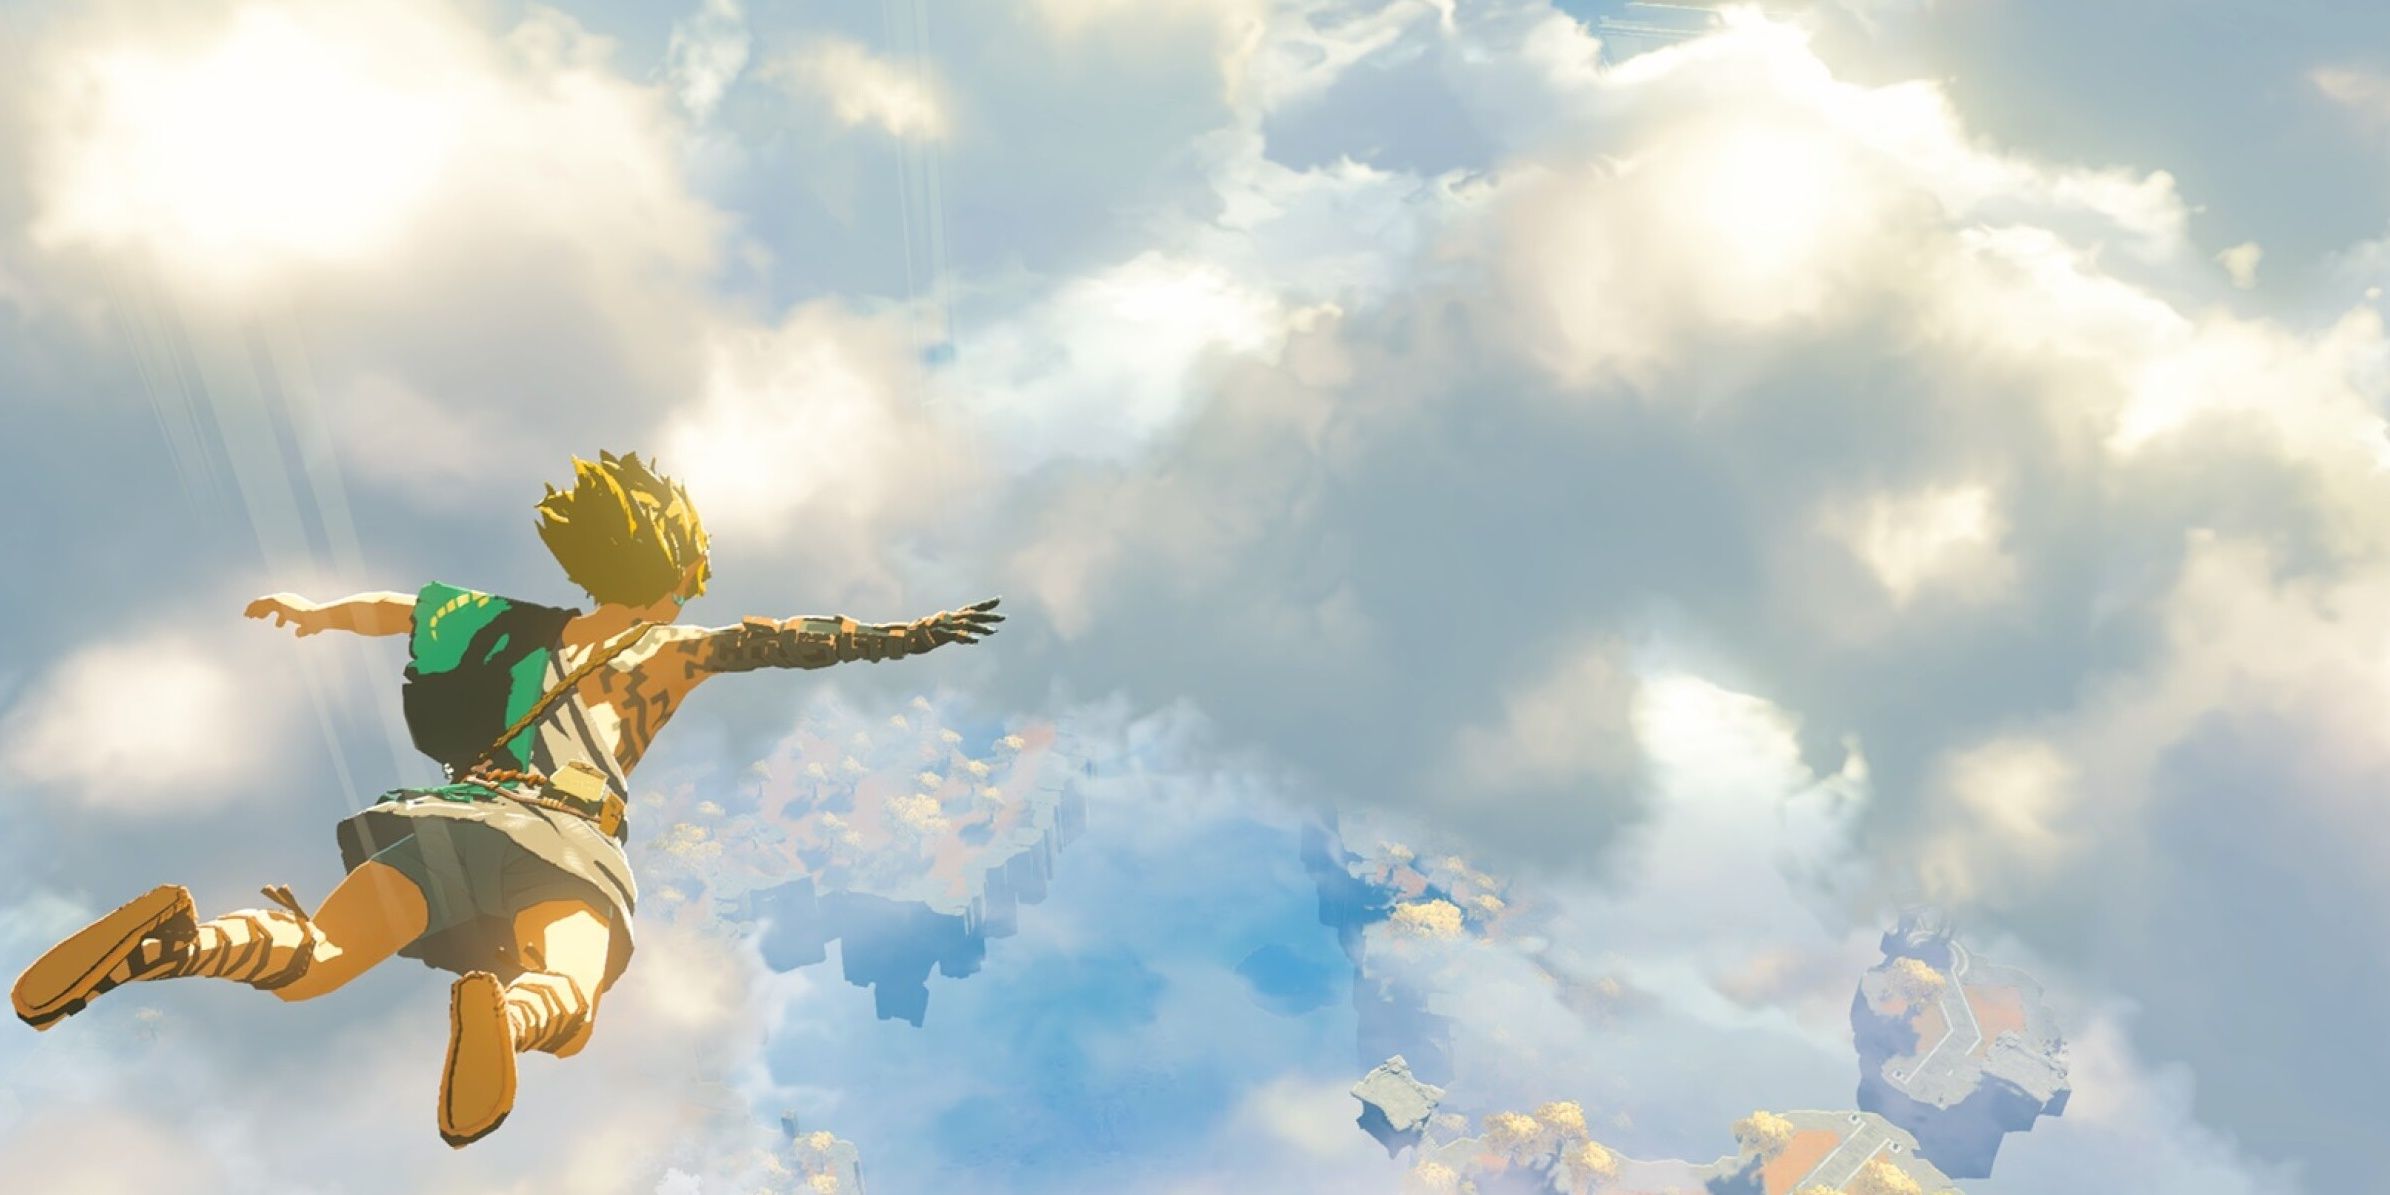 image from the game Zelda Breath of the Wild 2 showing Link flying in the skies above Hyrule